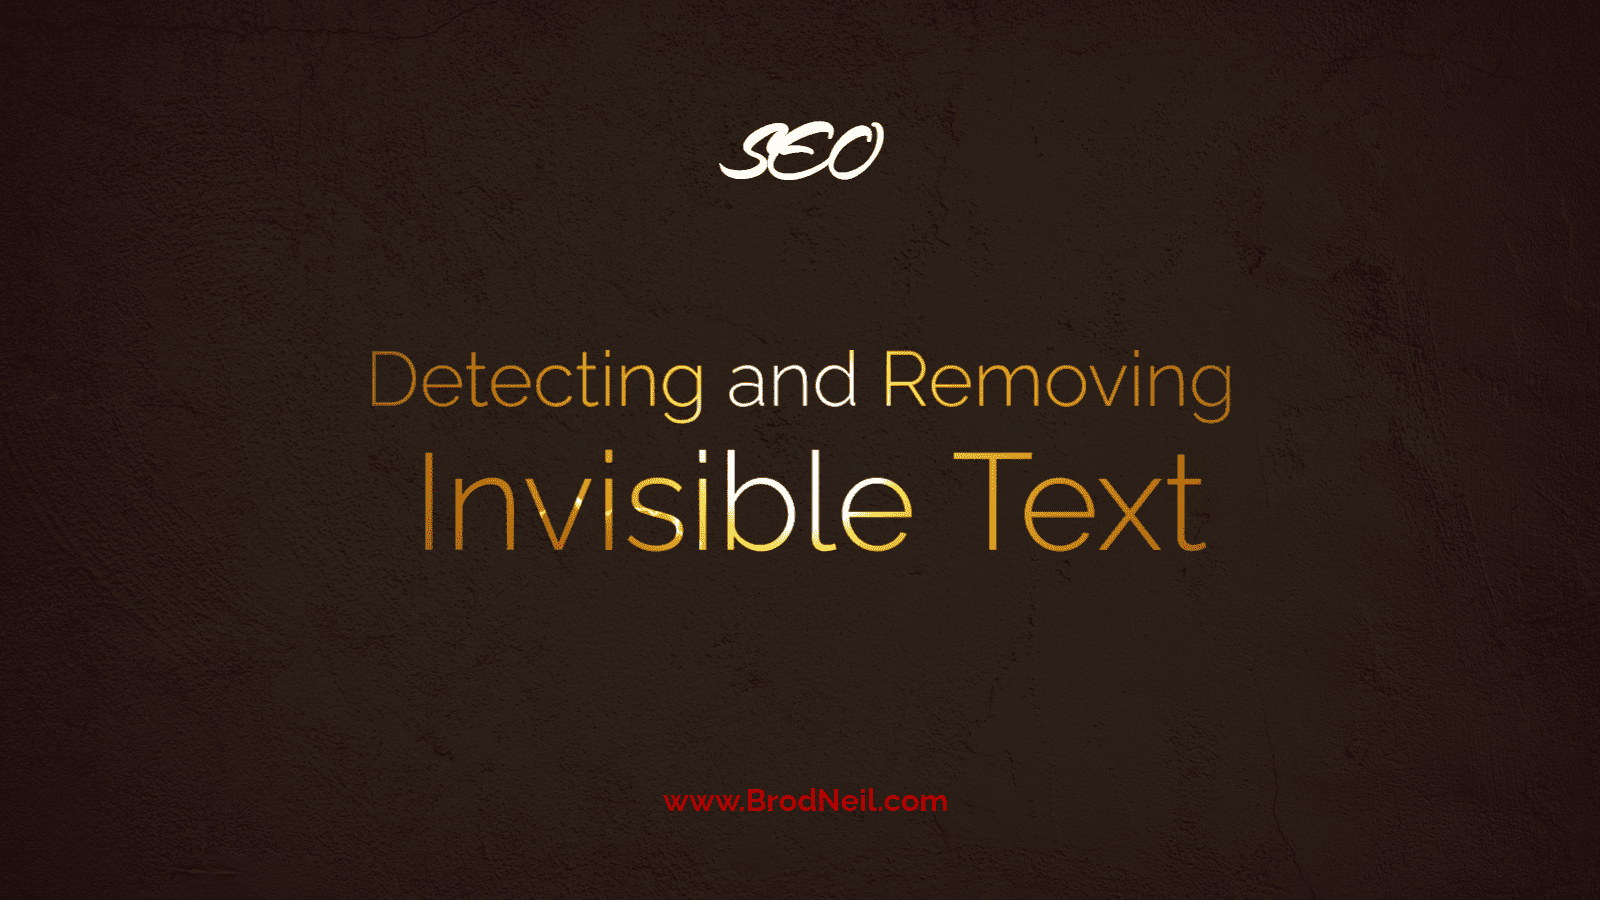 Detecting and Removing Invisible Text